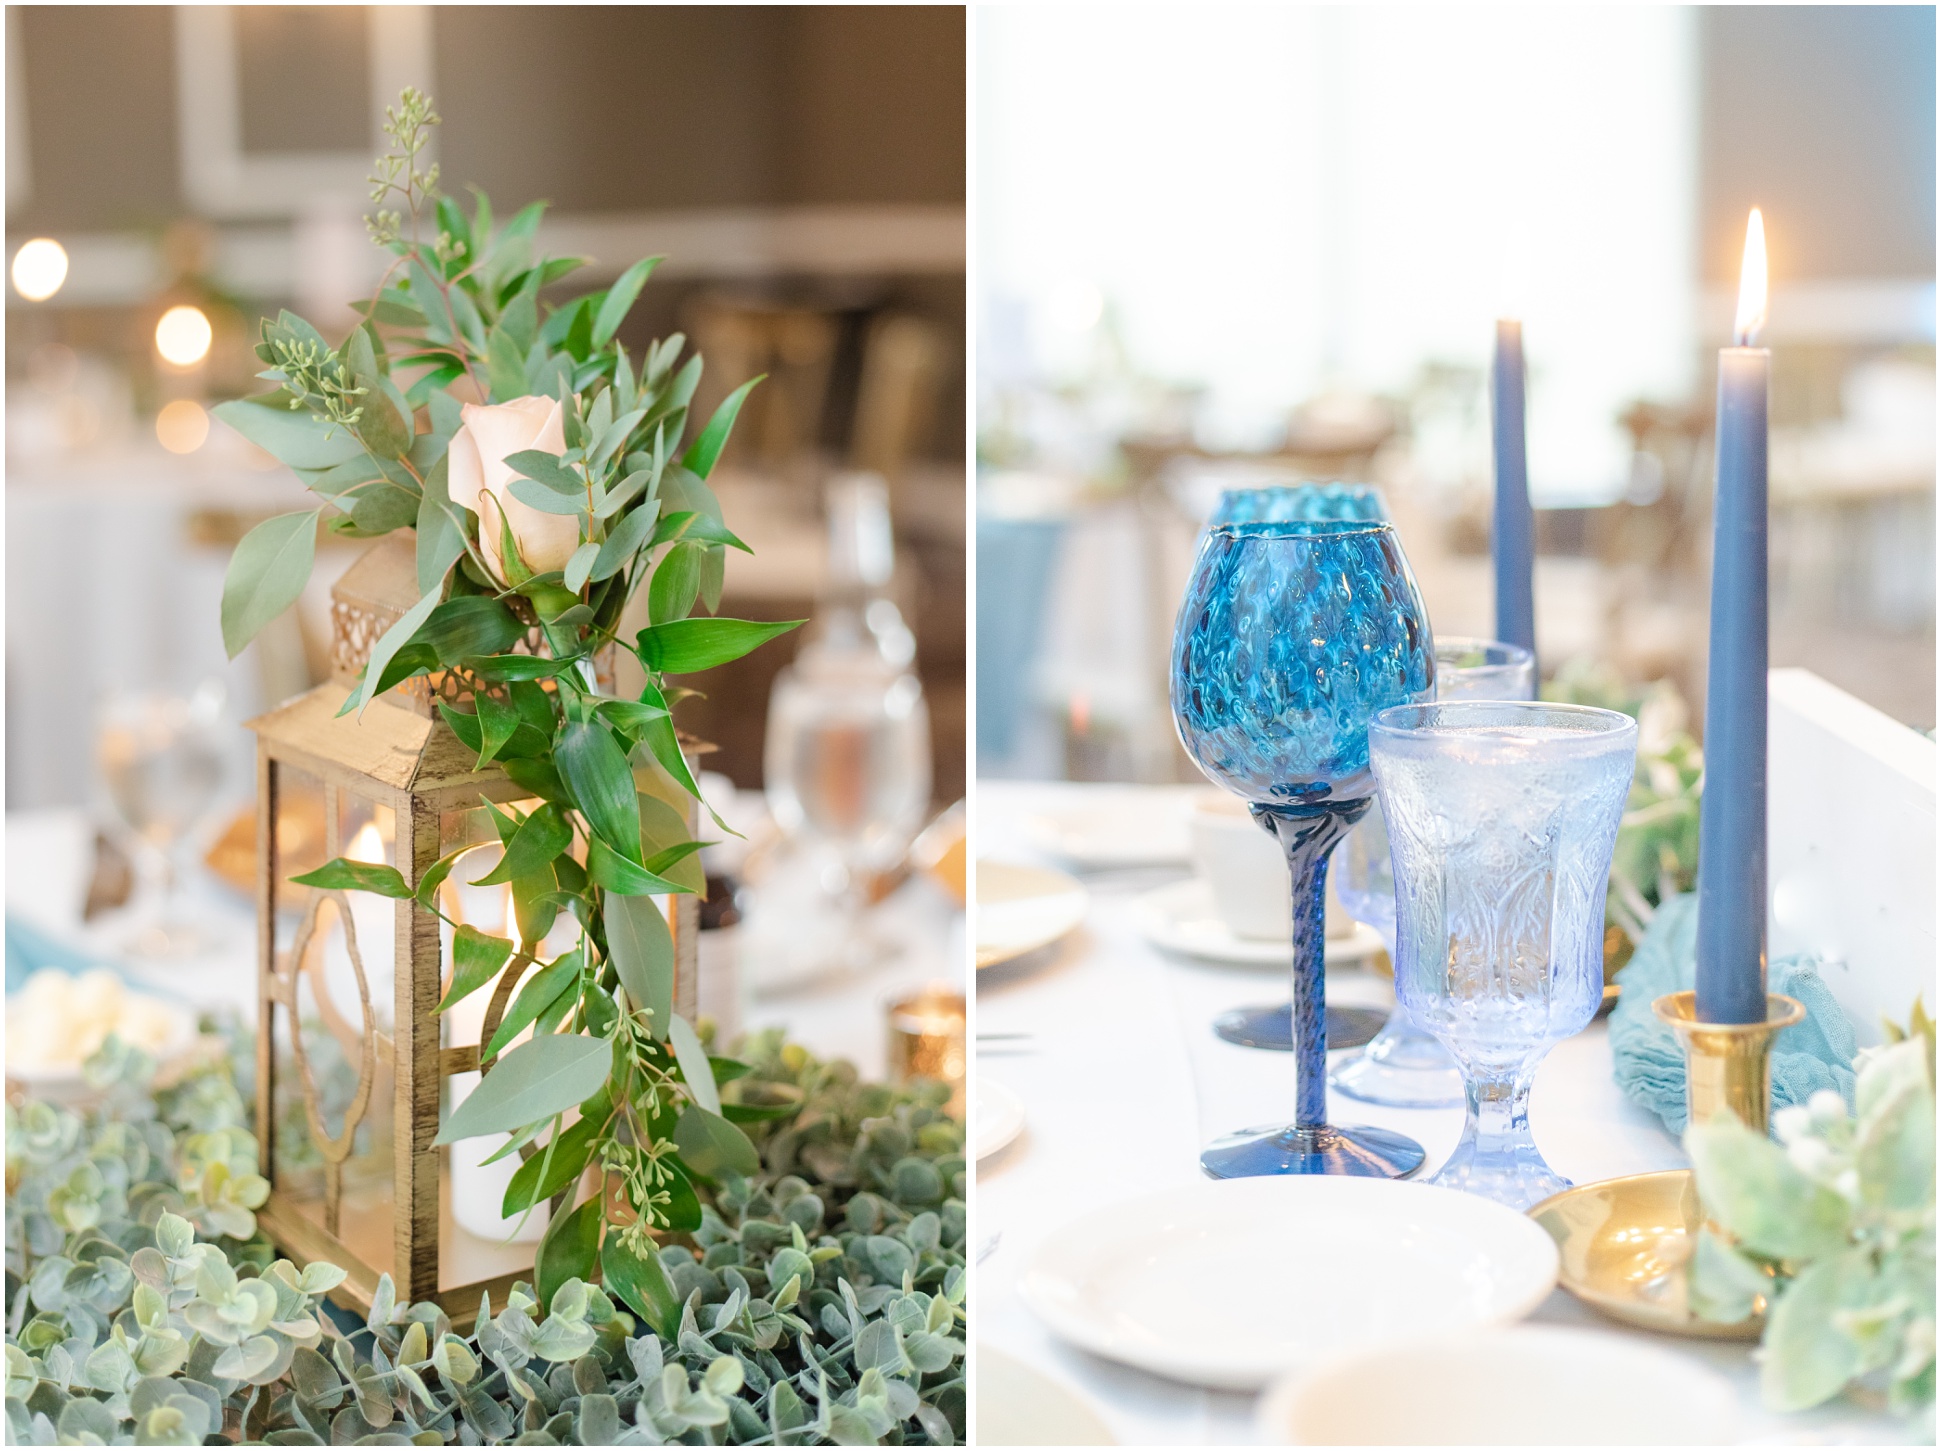 Reception details for the Whiteside wedding at Eagles Nest Country Club in Phoenix, MD